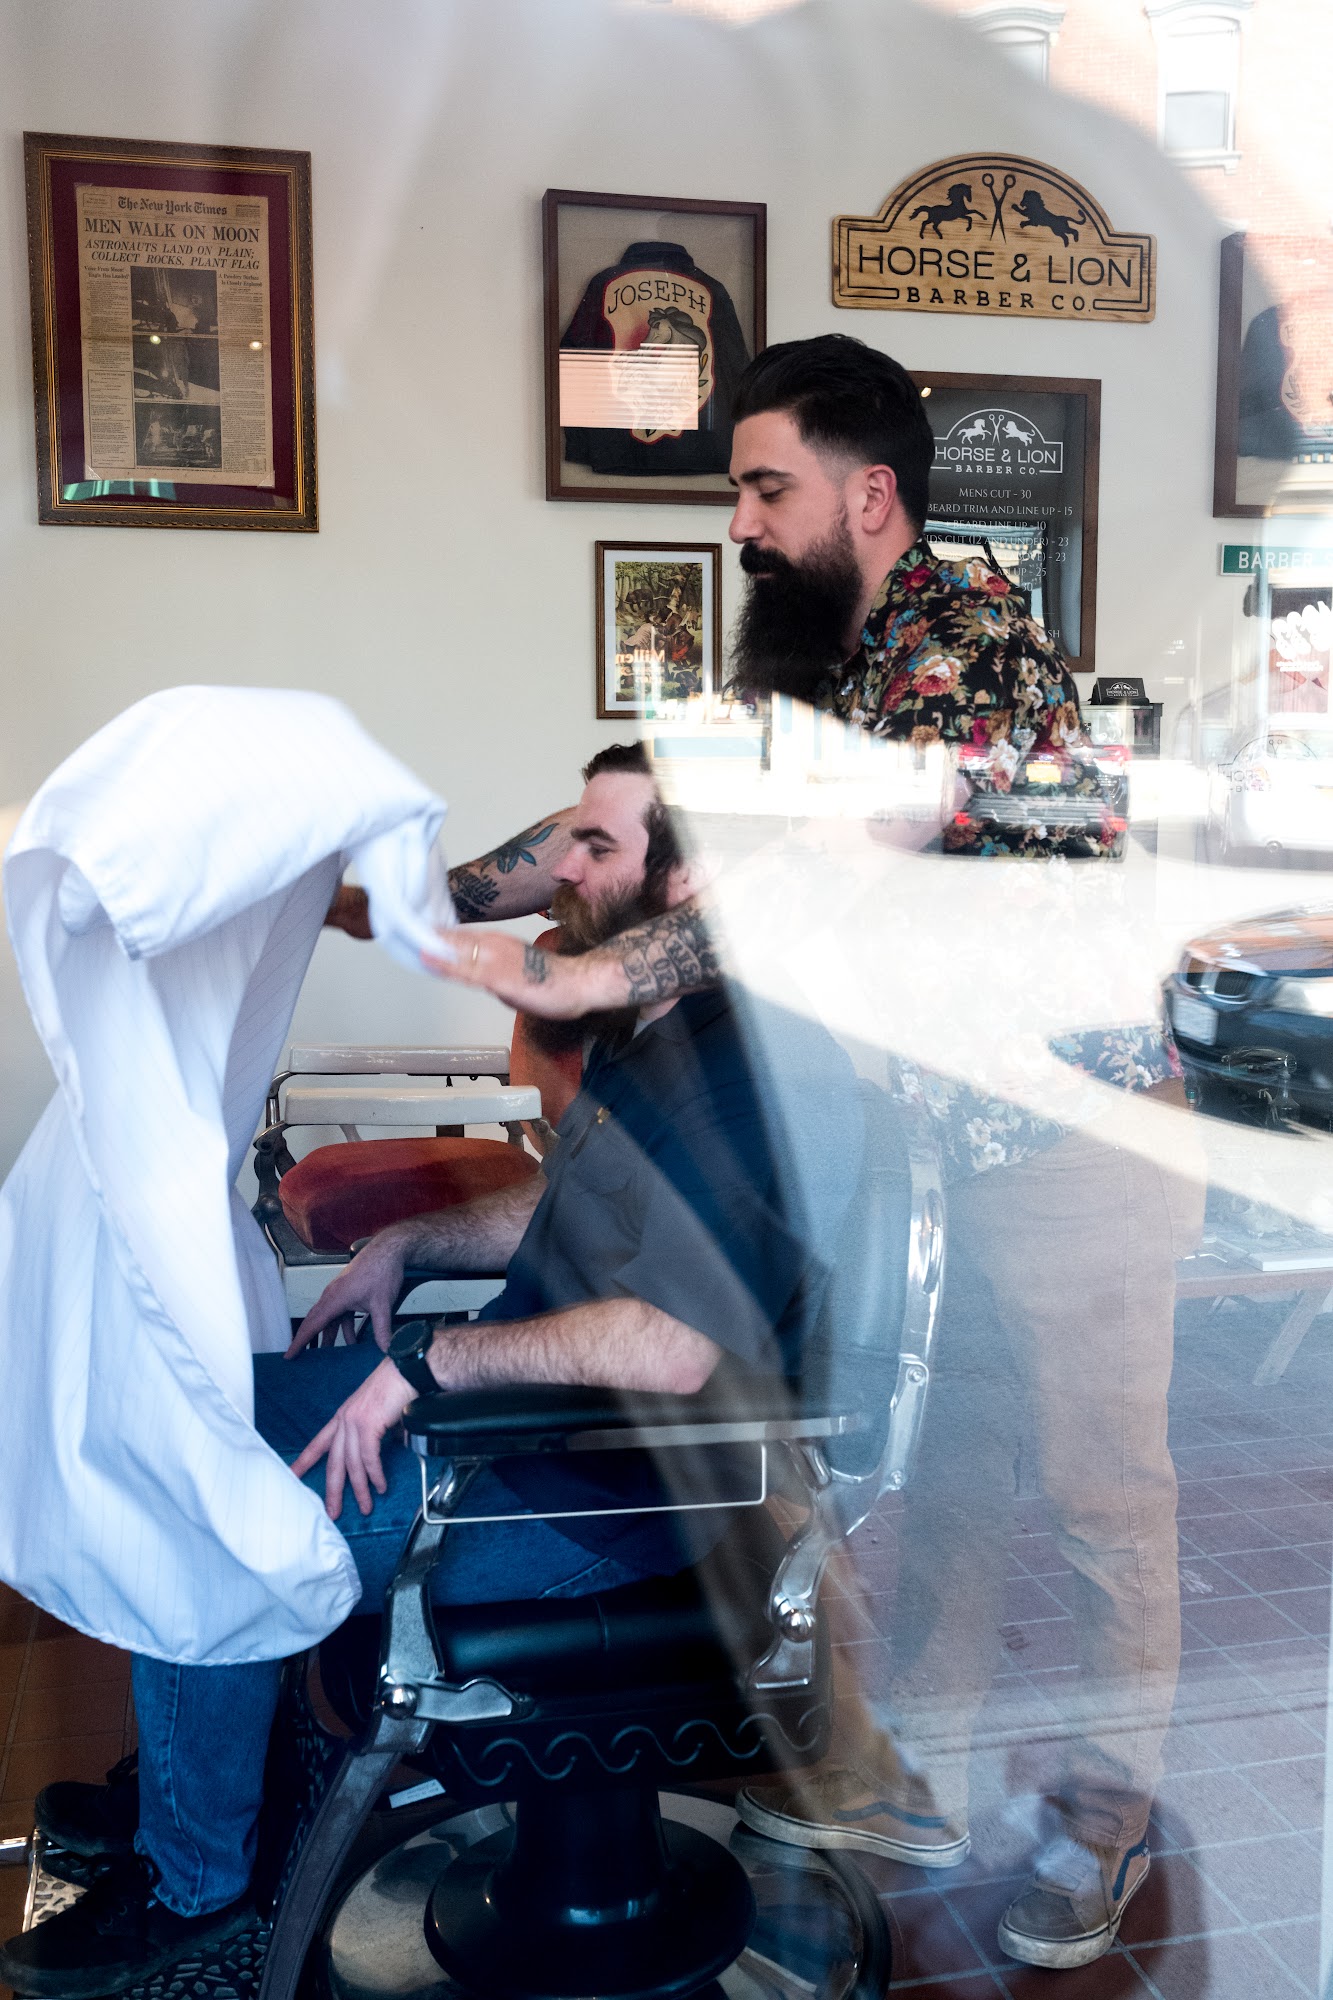 Horse and Lion Barber co 25 E Main St, Beacon New York 12508